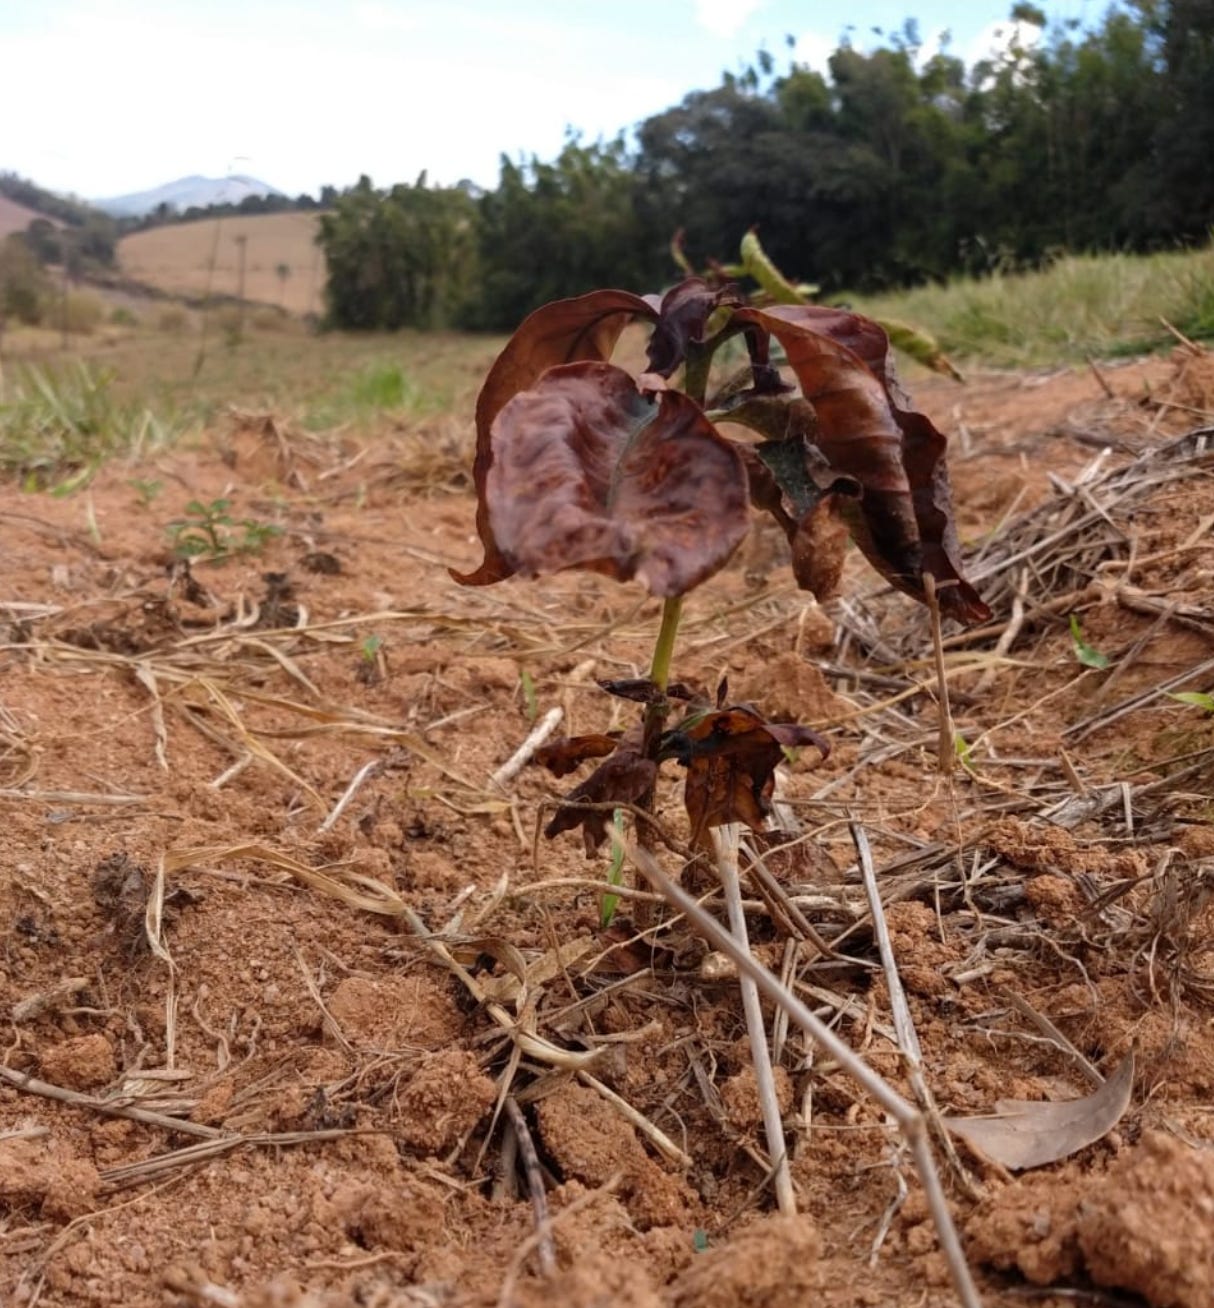 A close up of a frost damaged coffee plant close to the ground. The leaves are browned and damaged.